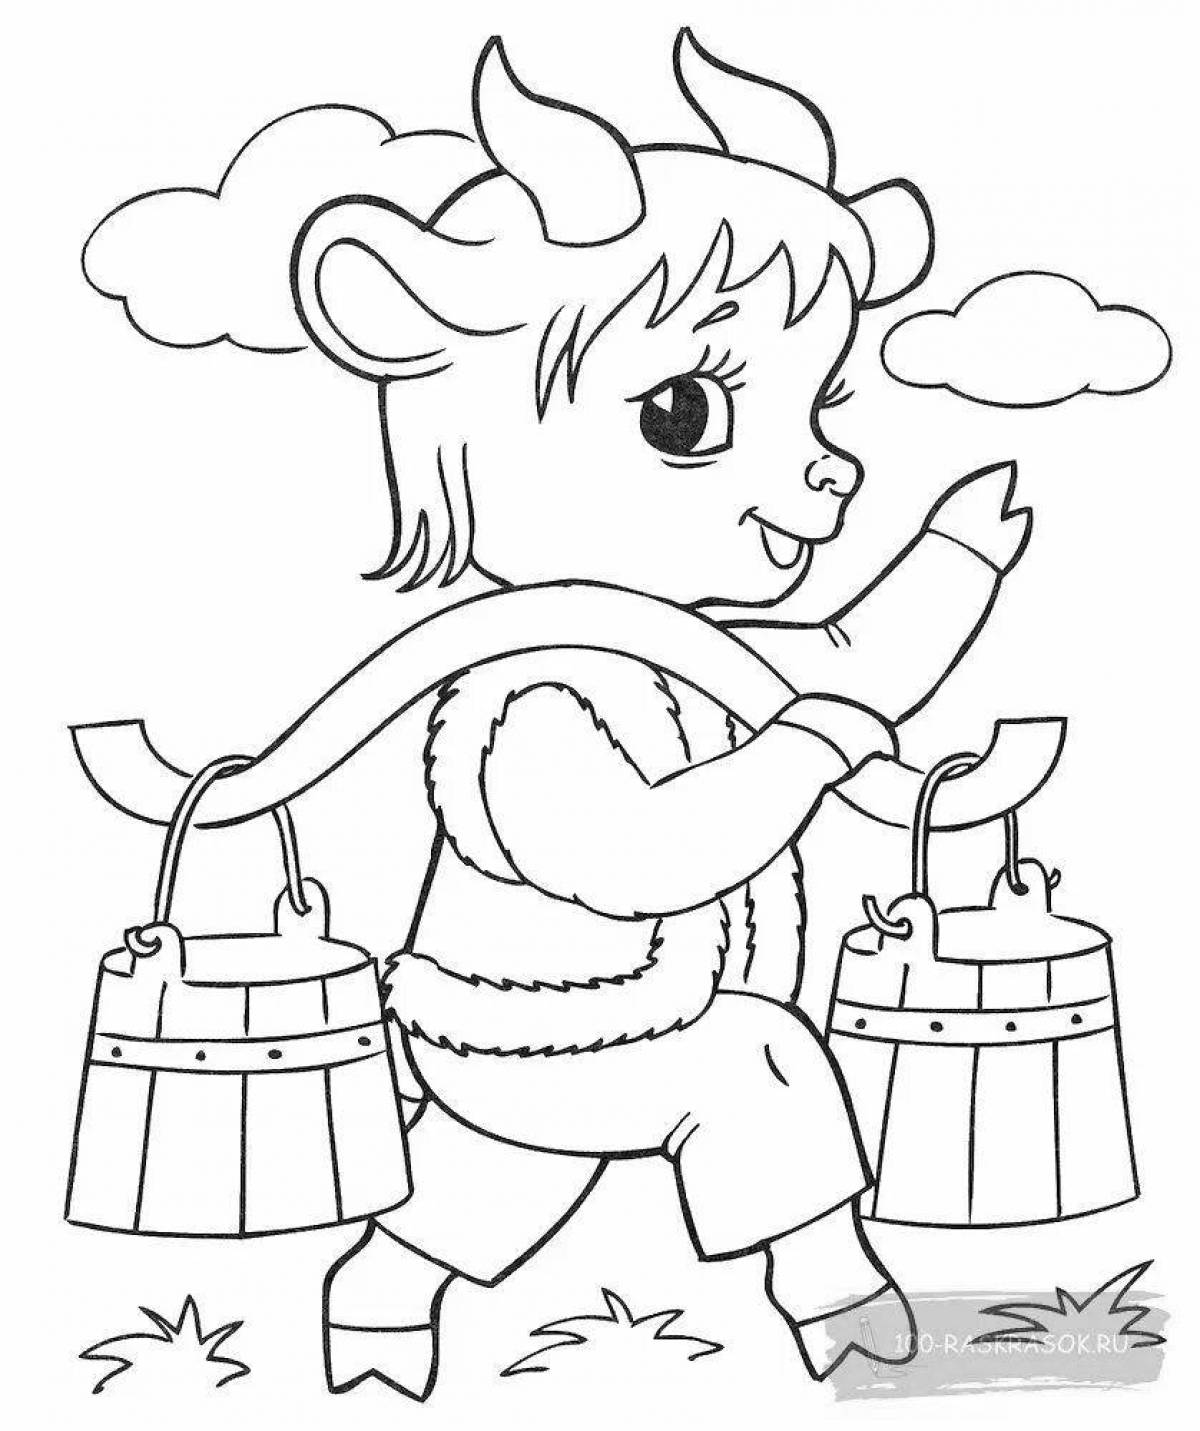 Coloring page blessed goat and seven kids